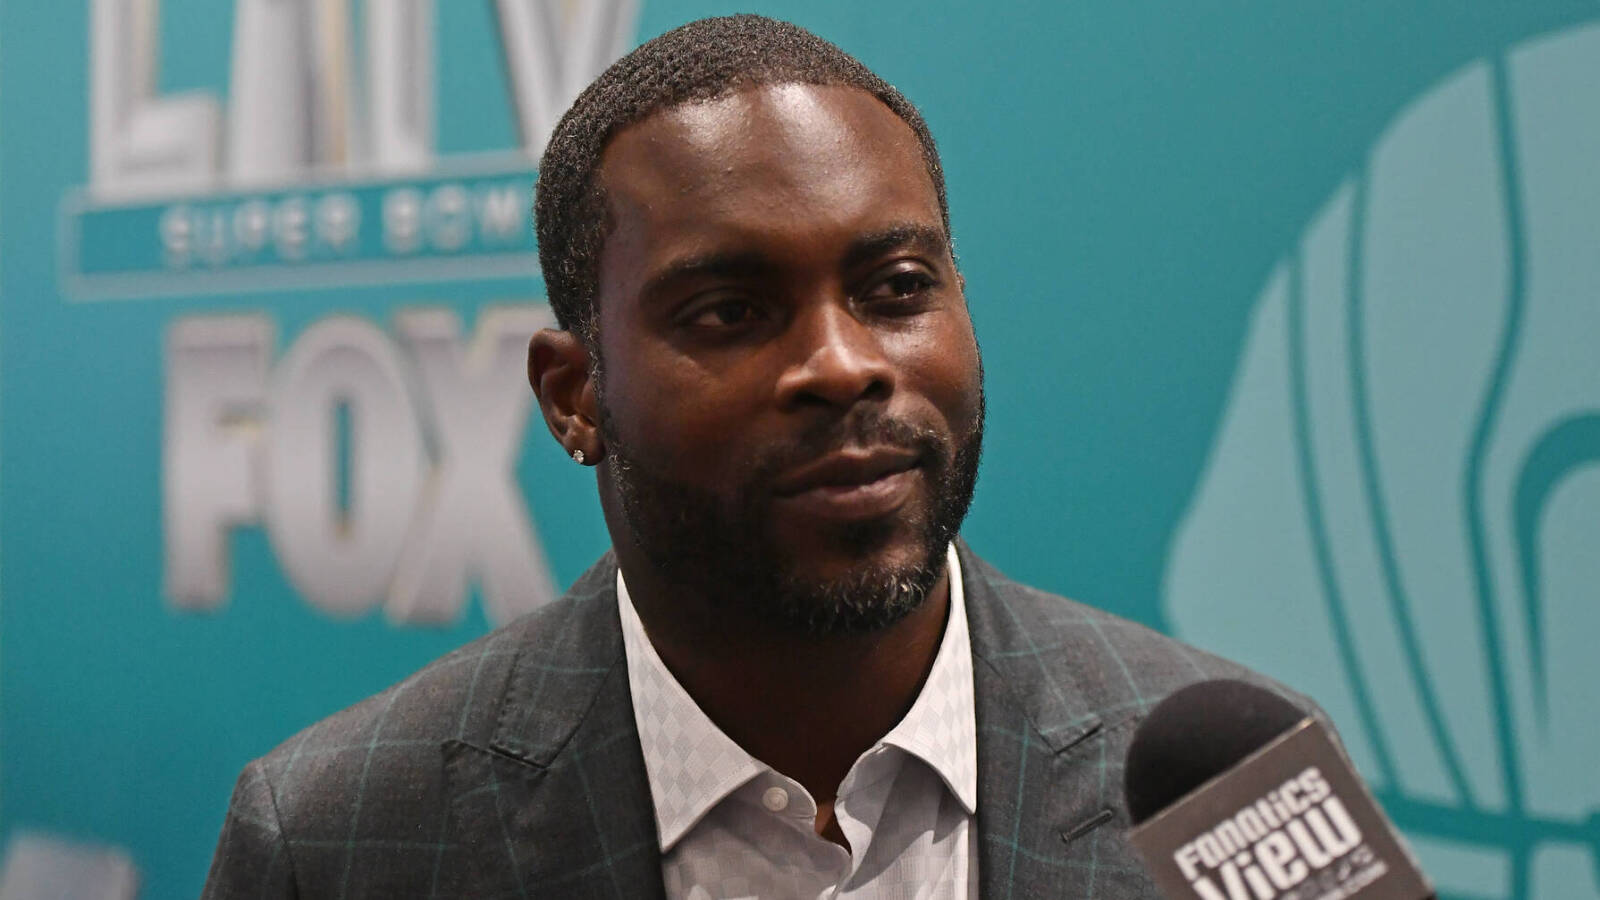 Michael Vick joining Fan Controlled Football league